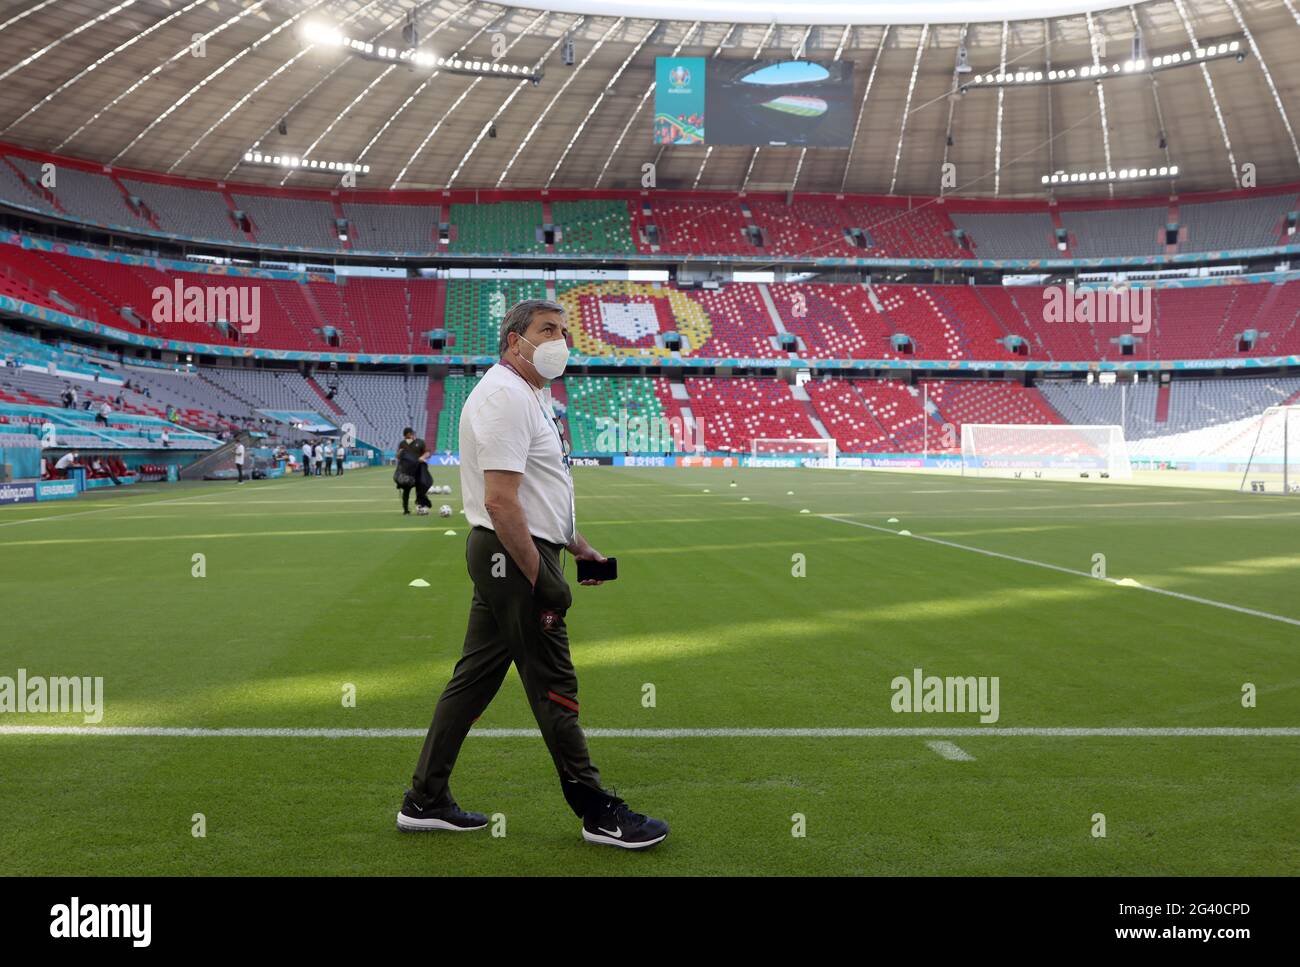 Munich, Germany. 18th June, 2021. Football: European Championship, Group F, final training Portugal before the match against Germany. Fernando Gomes, President of the Portuguese Football Association, walks through the Munich stadium. Credit: Christian Charisius/dpa/Alamy Live News Stock Photo